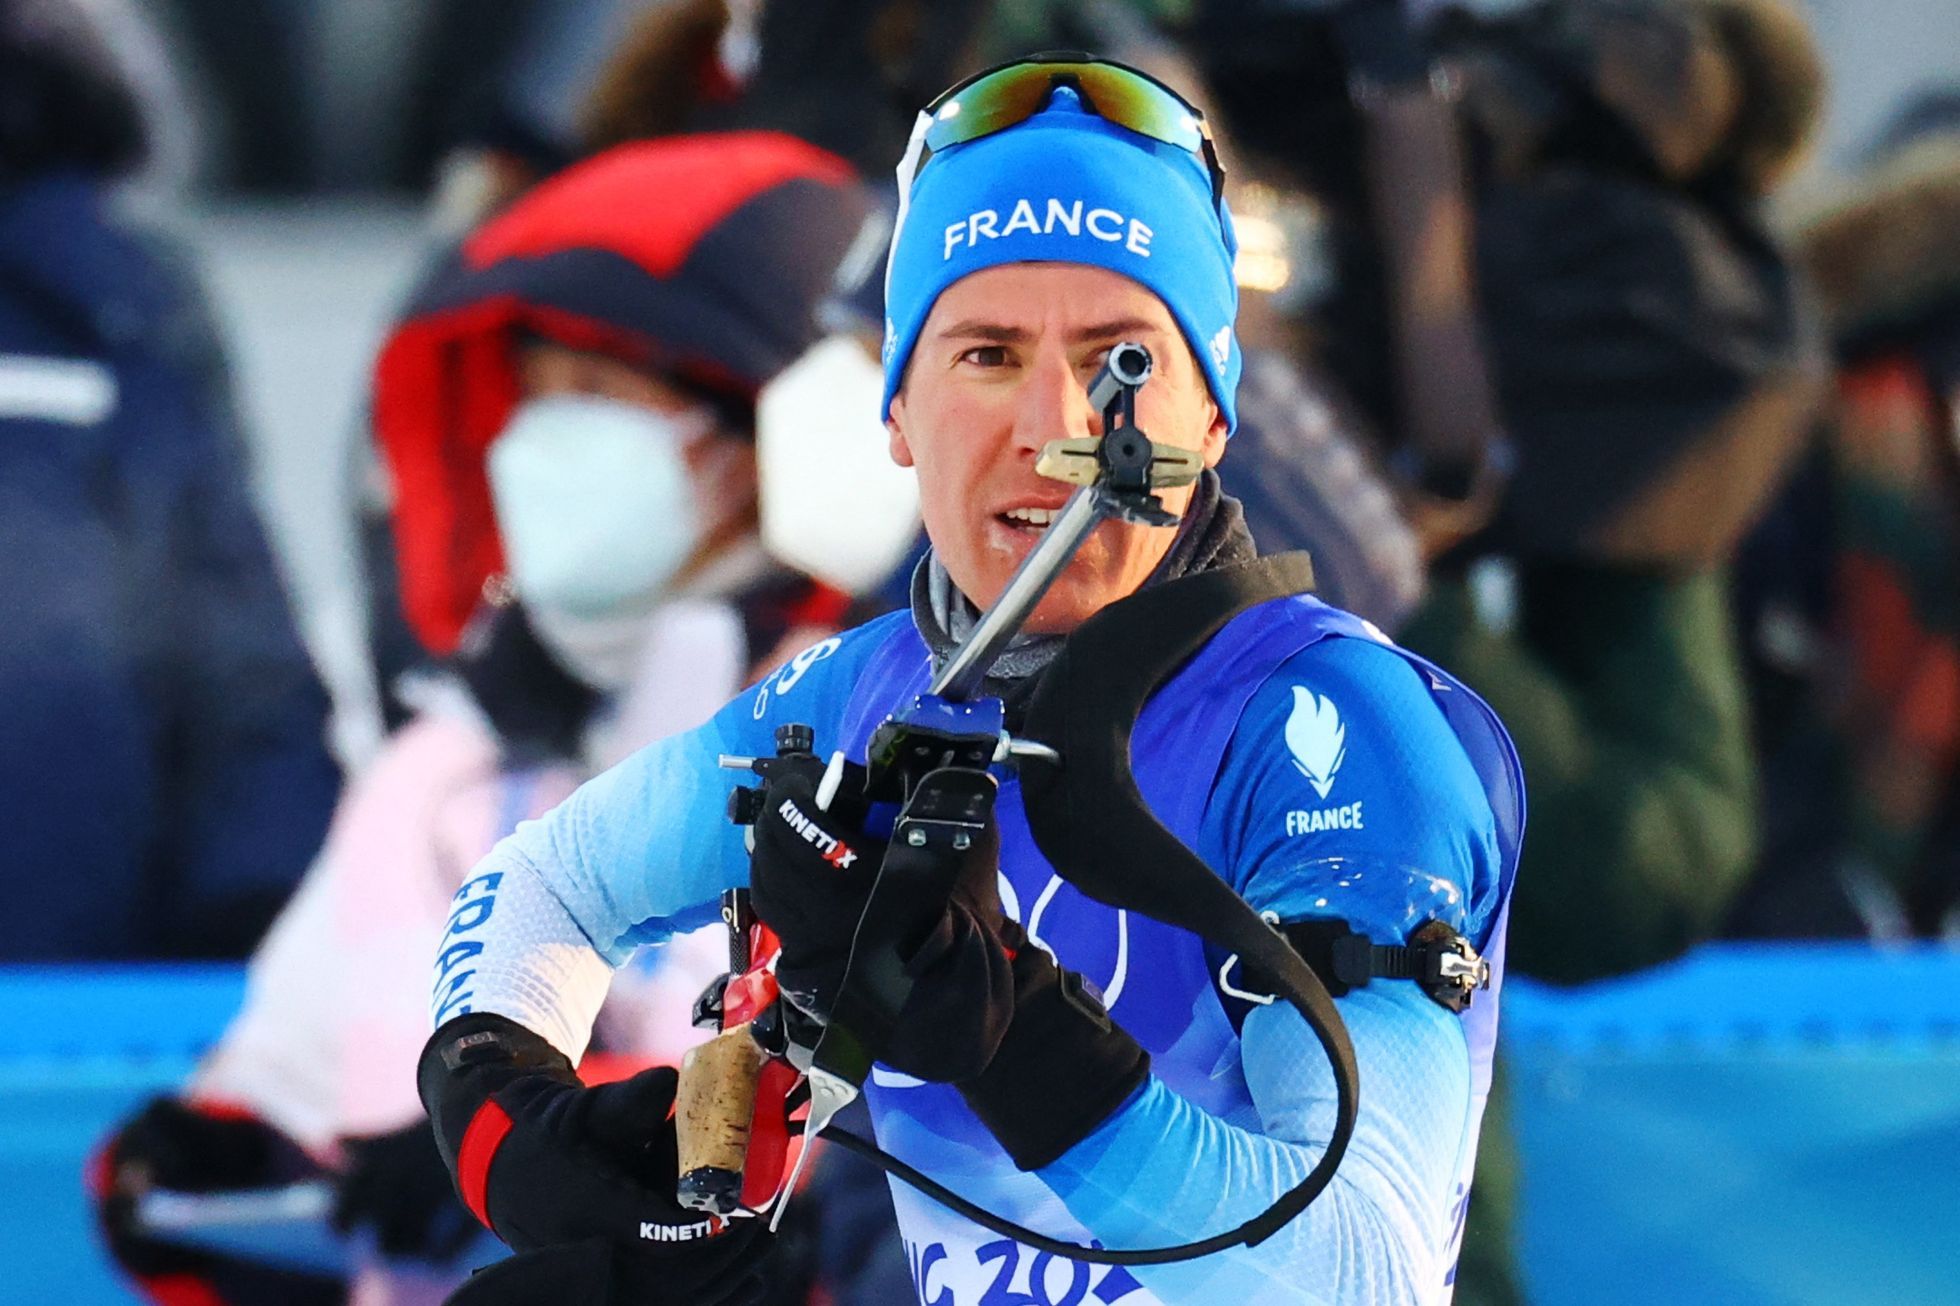 Biathlete Fillon Maillet is the overall winner of the World Cup for the first time